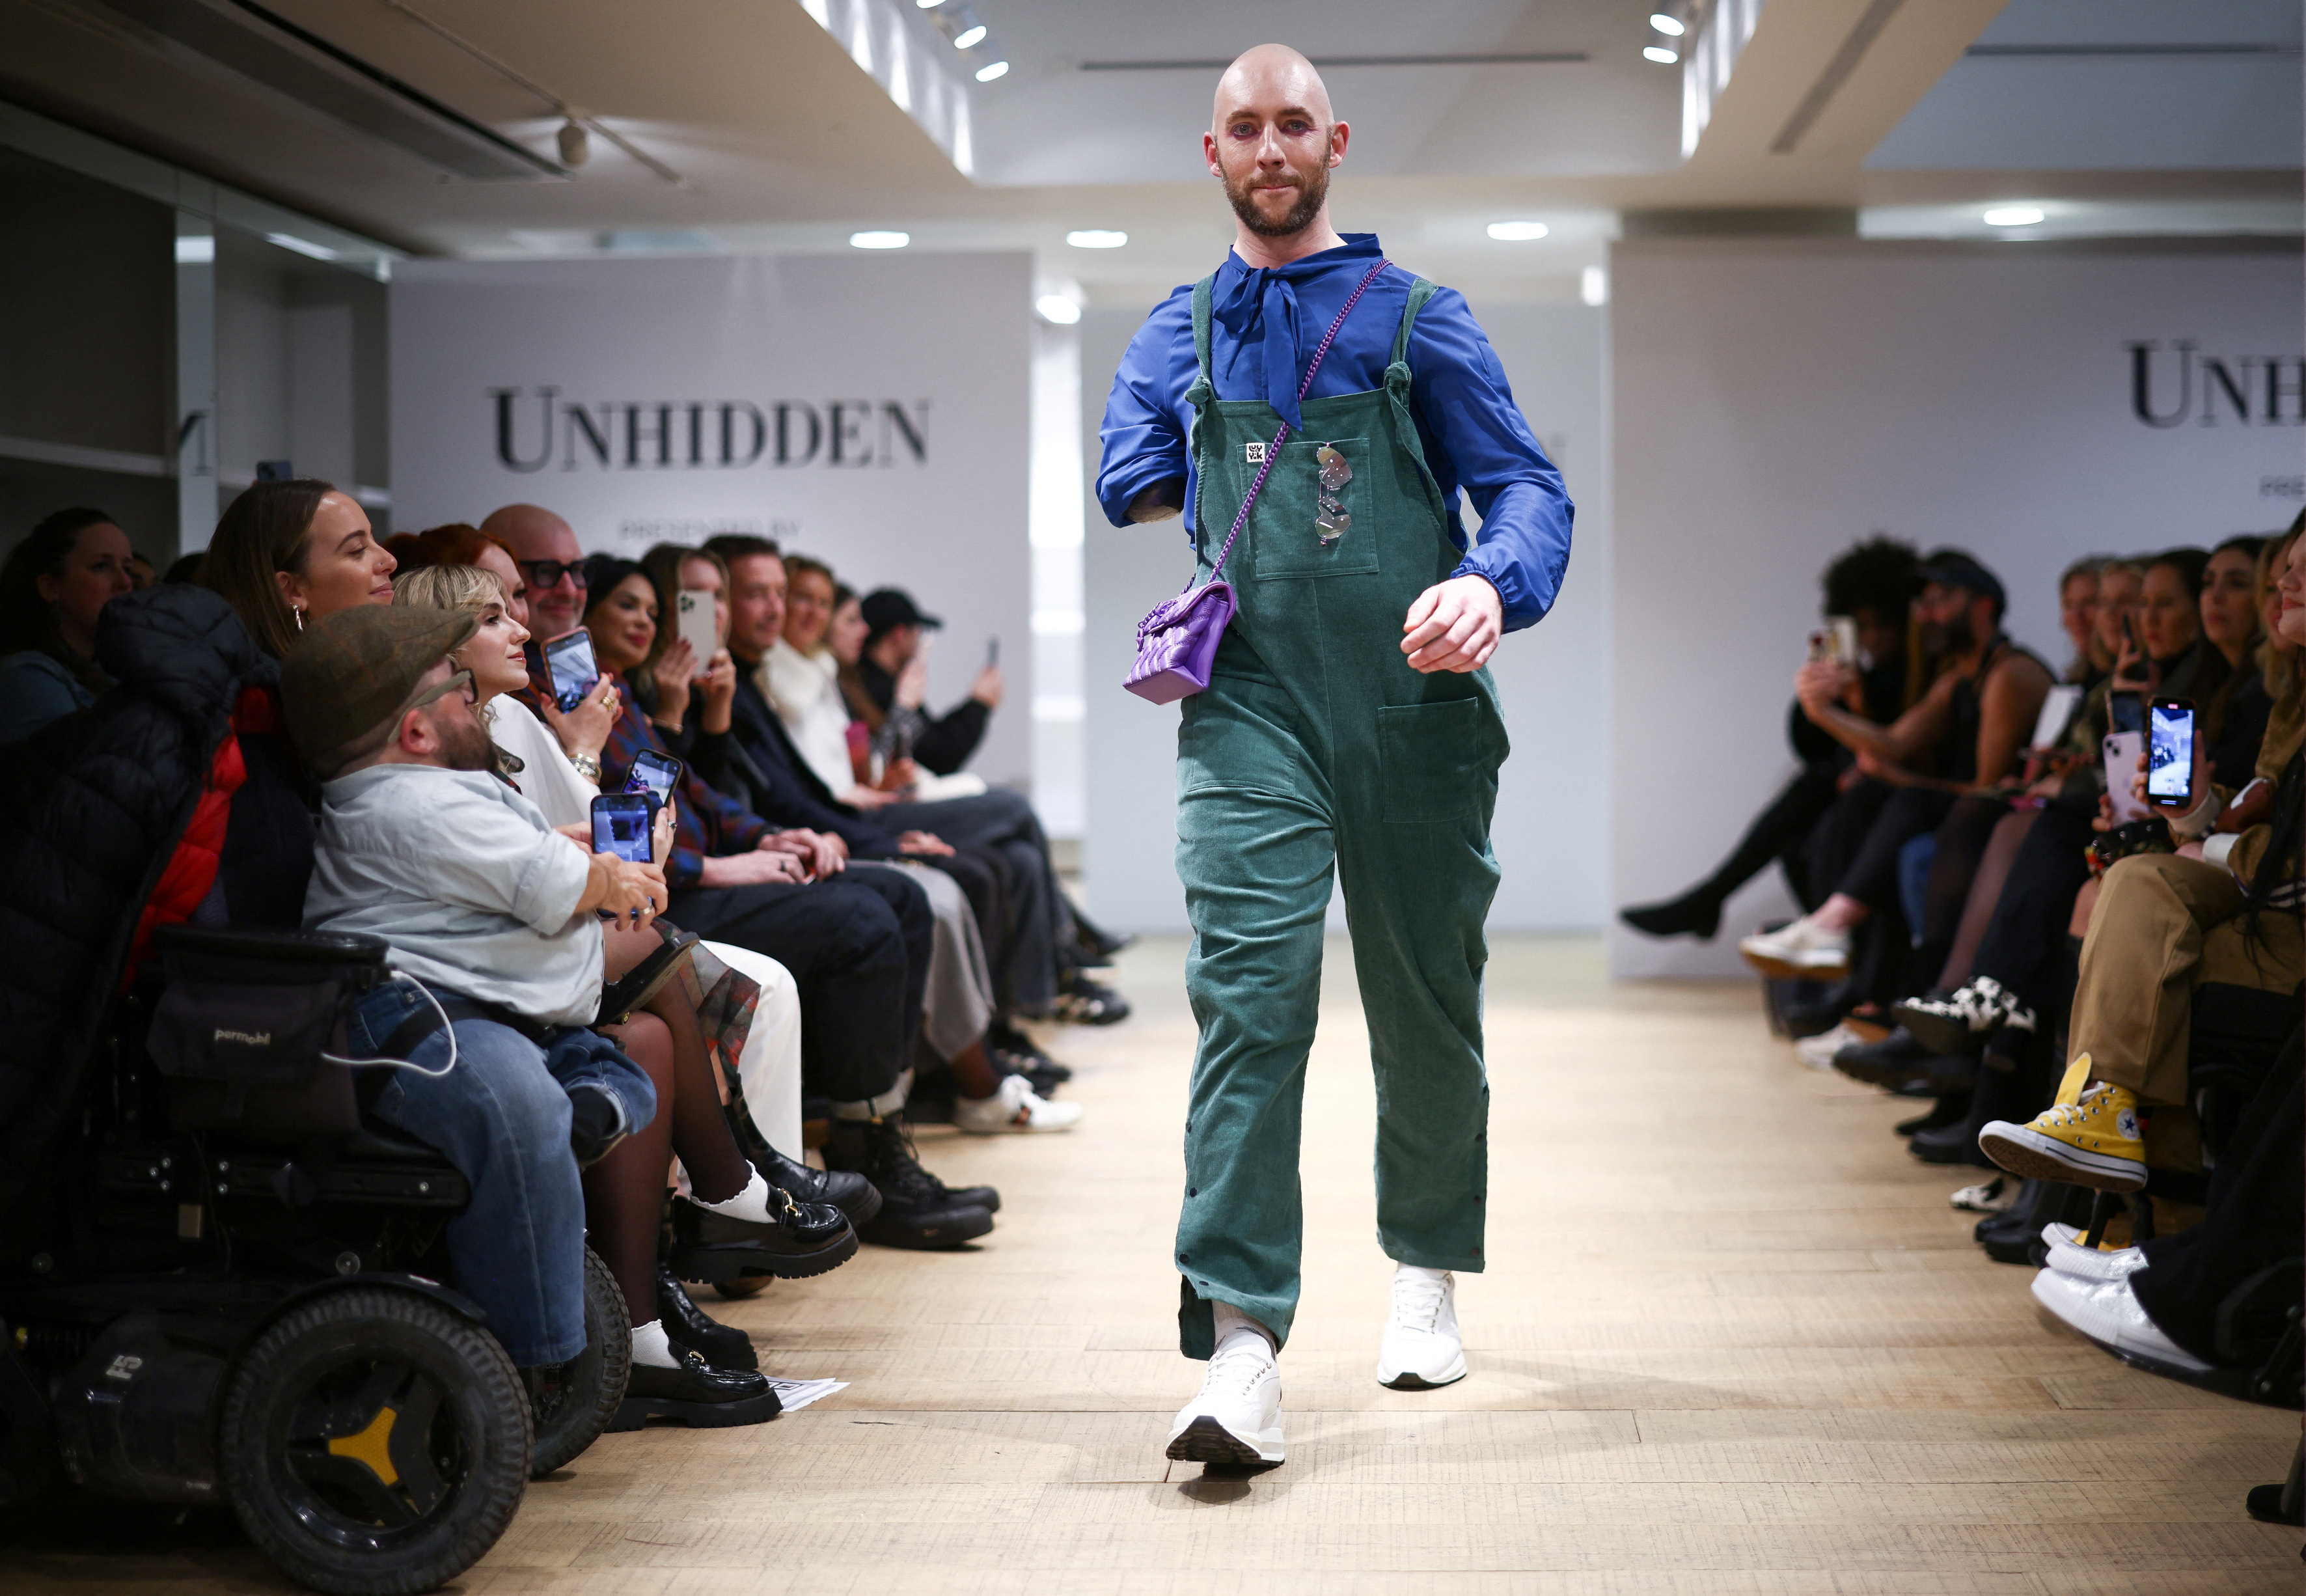 Fashion brand 'Unhidden' brings clothes made for all bodies to London  Fashion Week